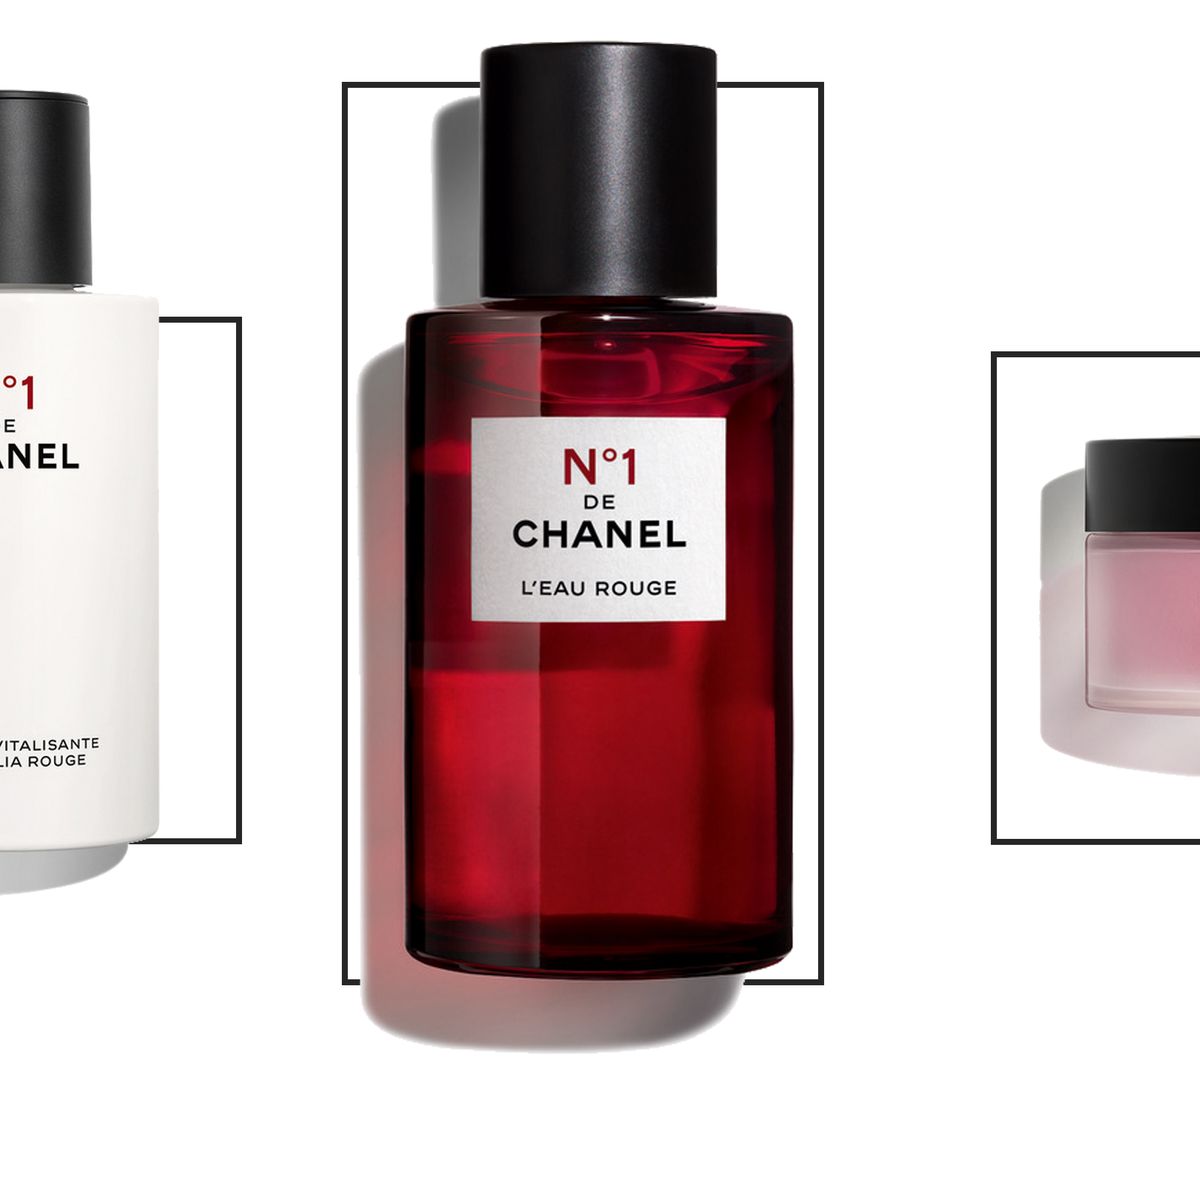 CHANEL N°1 L'EAU ROUGE Fragrance Review - CHANEL No1 Perfume and